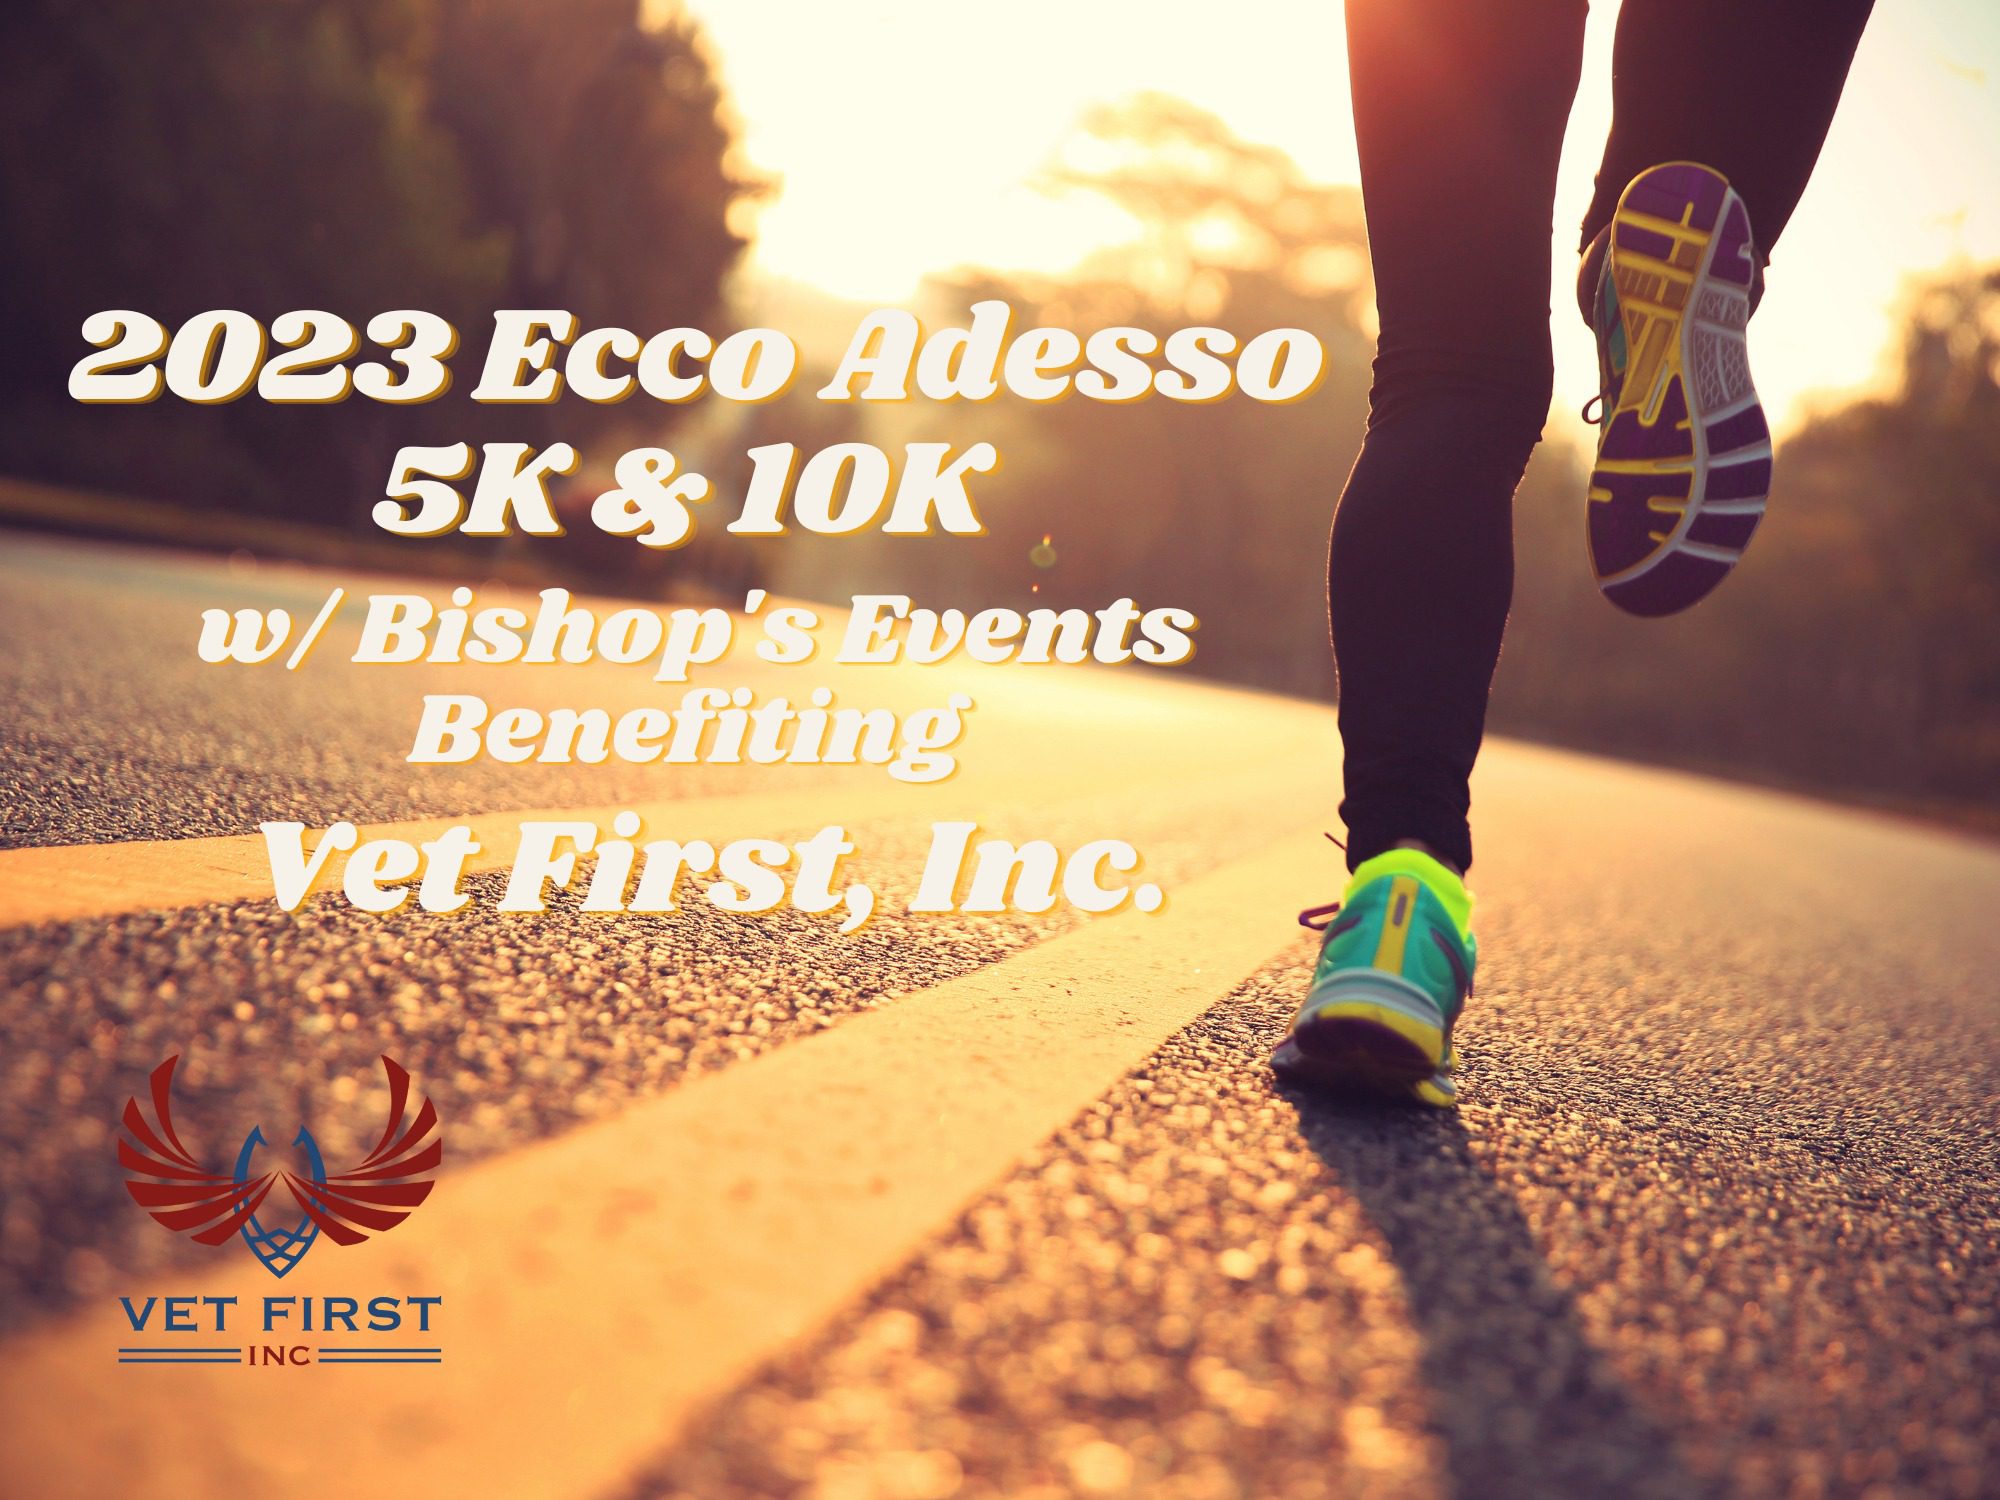 2023 Ecco Adesso 5k & 10k W/ Bishop's Events Benefiting Vet First, Inc.